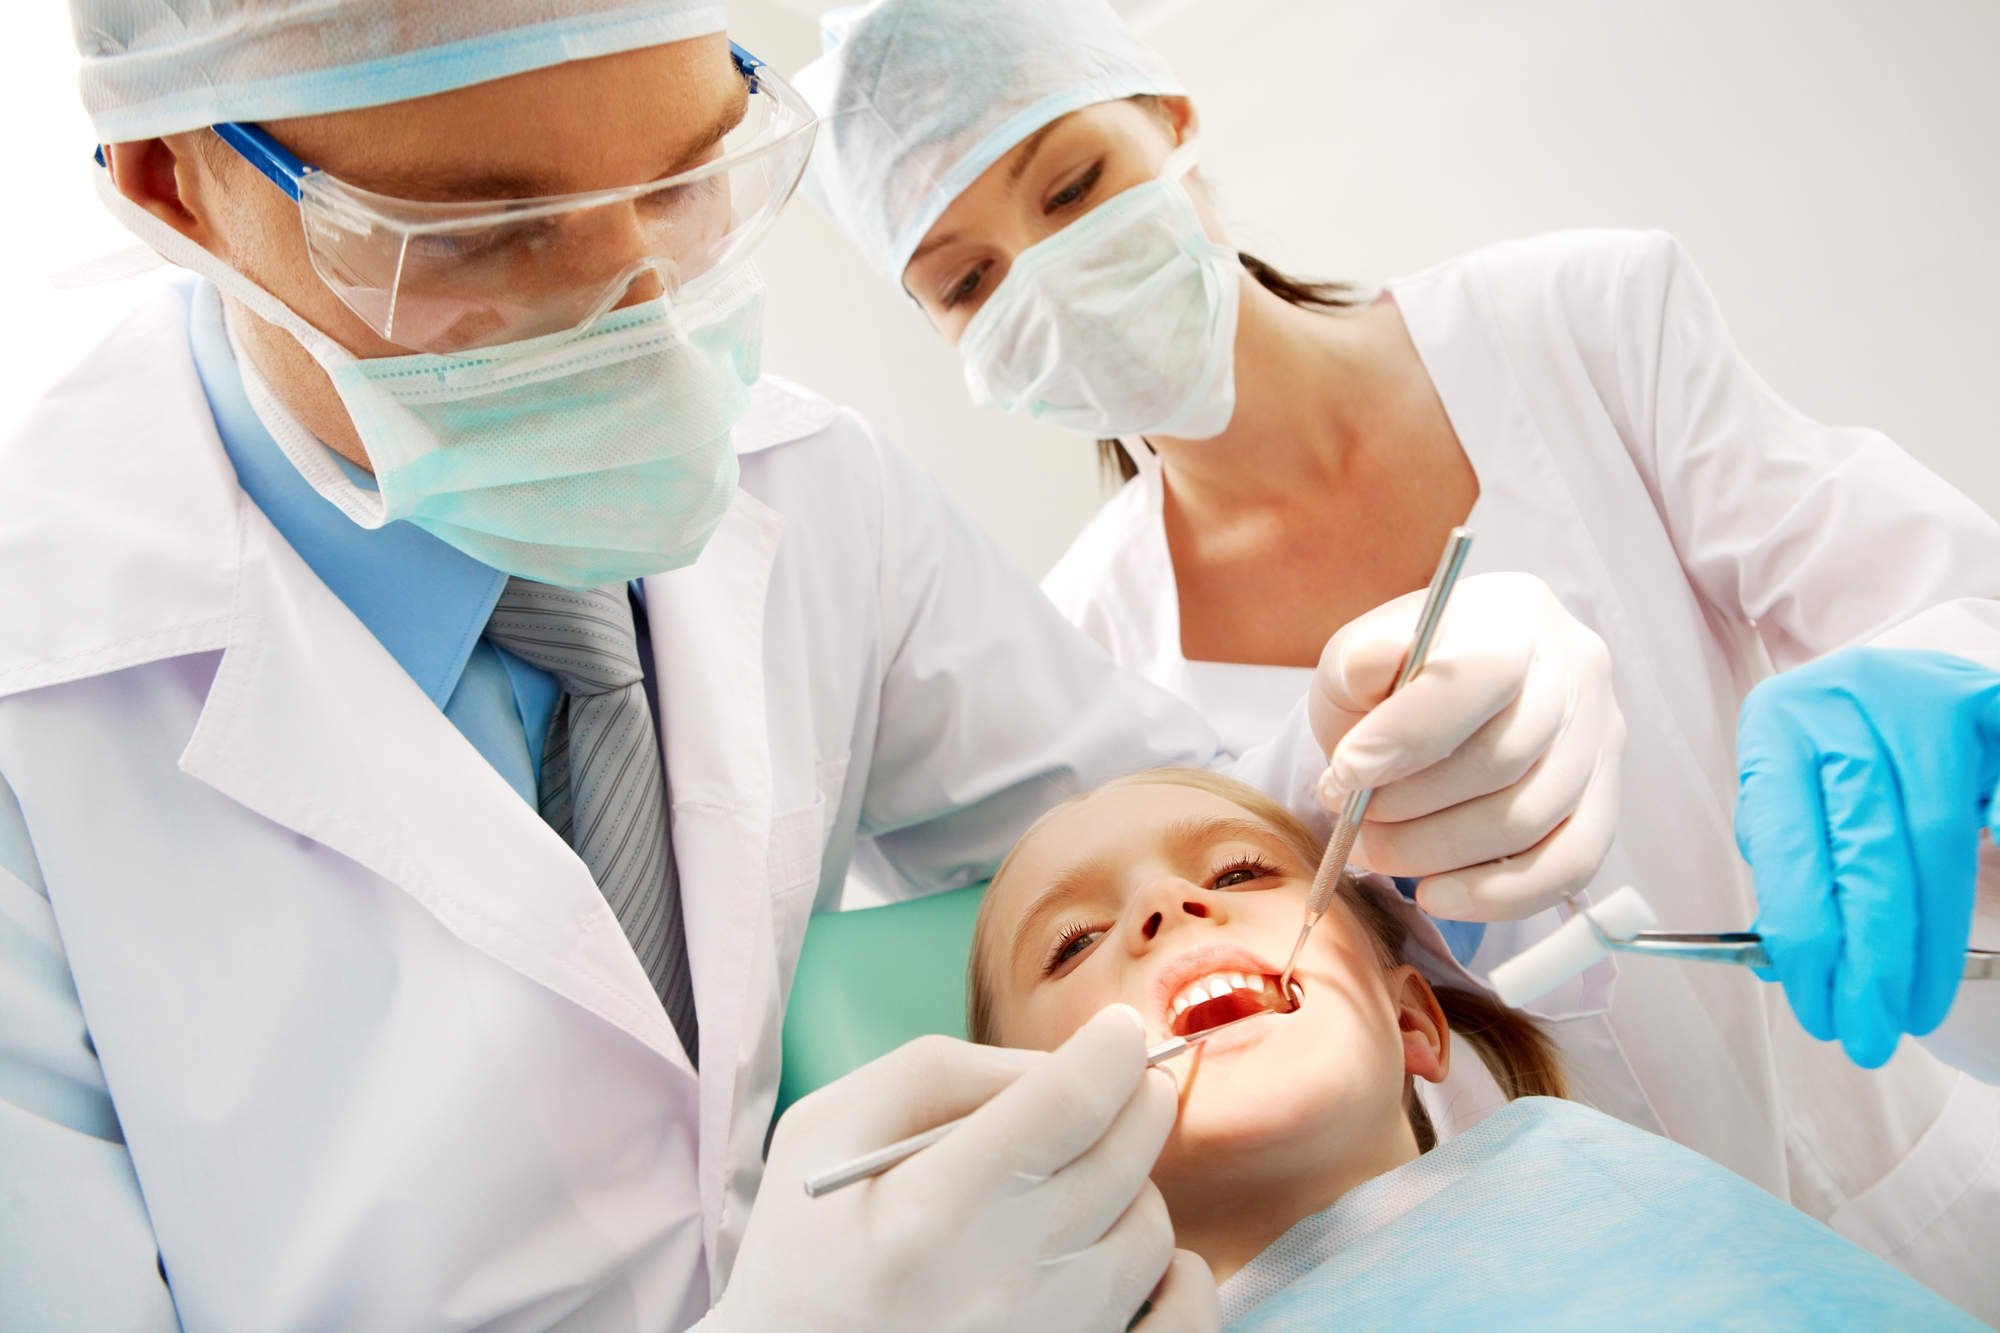 Why are kids dying at the dentist?